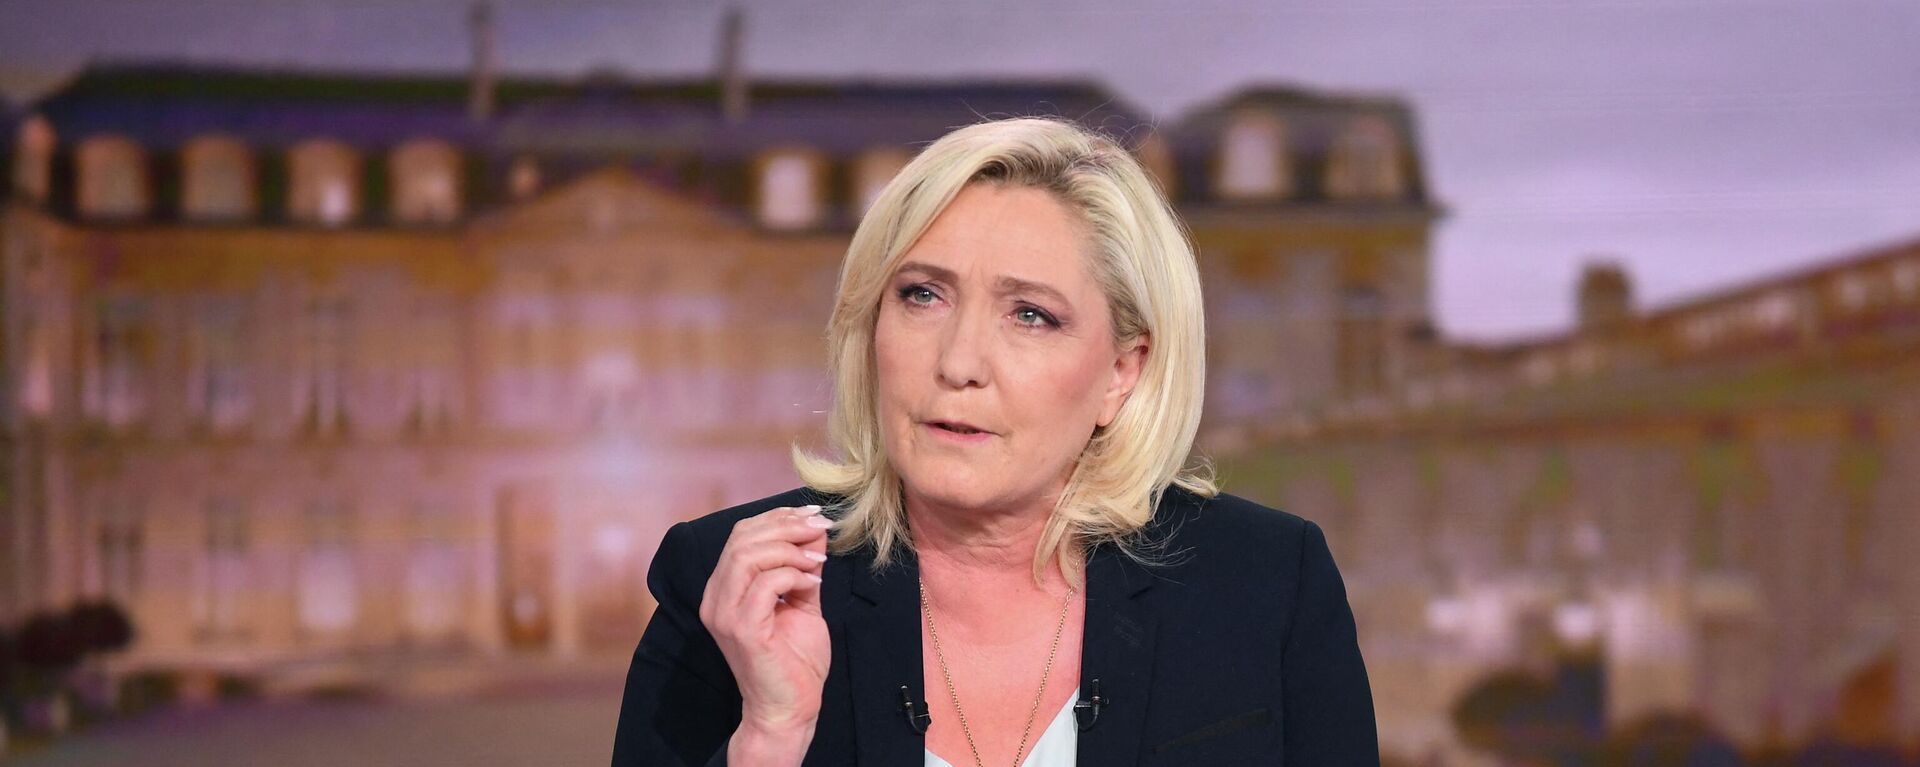 French far-right party Rassemblement National (RN) presidential candidate Marine Le Pen takes part in the evening news broadcast of French TV channel TF1, in Boulogne-Billancourt, outside Paris, on April 12, 2022. - Sputnik International, 1920, 19.04.2022